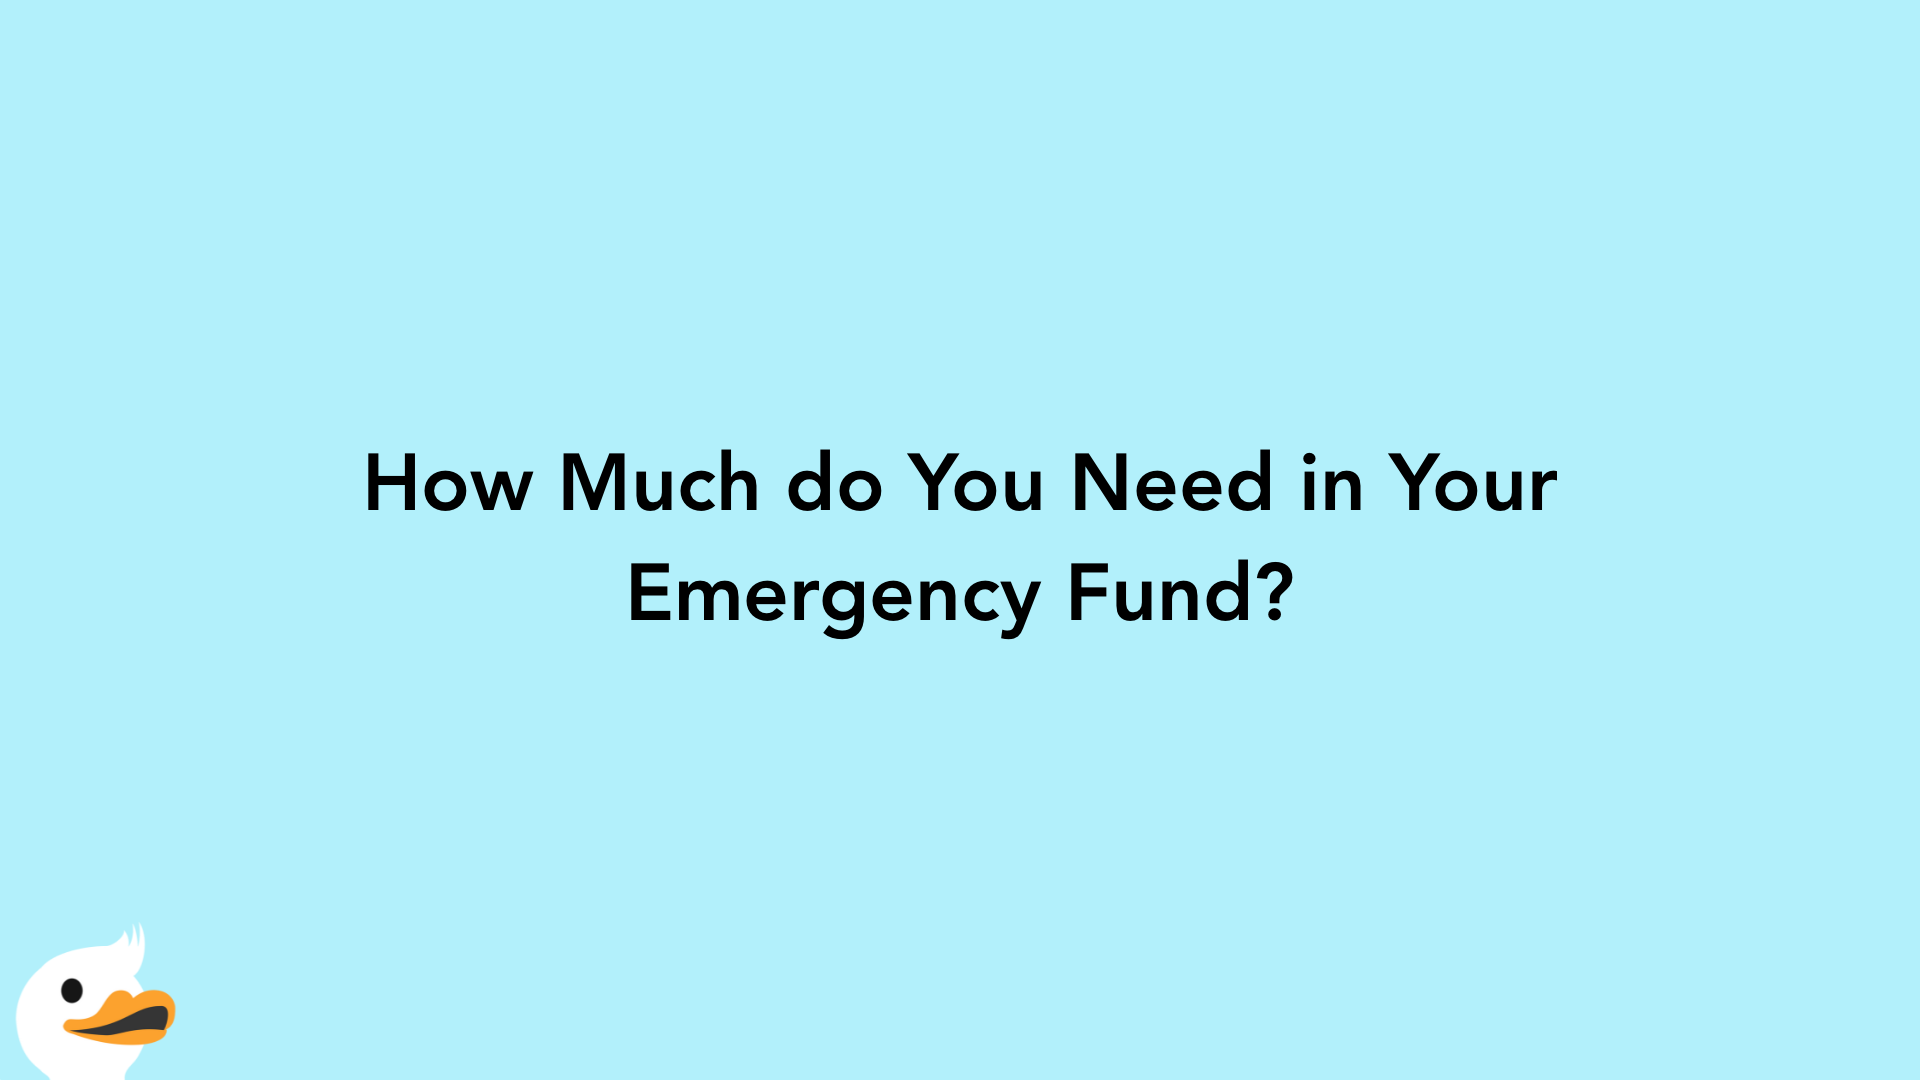 How Much do You Need in Your Emergency Fund?